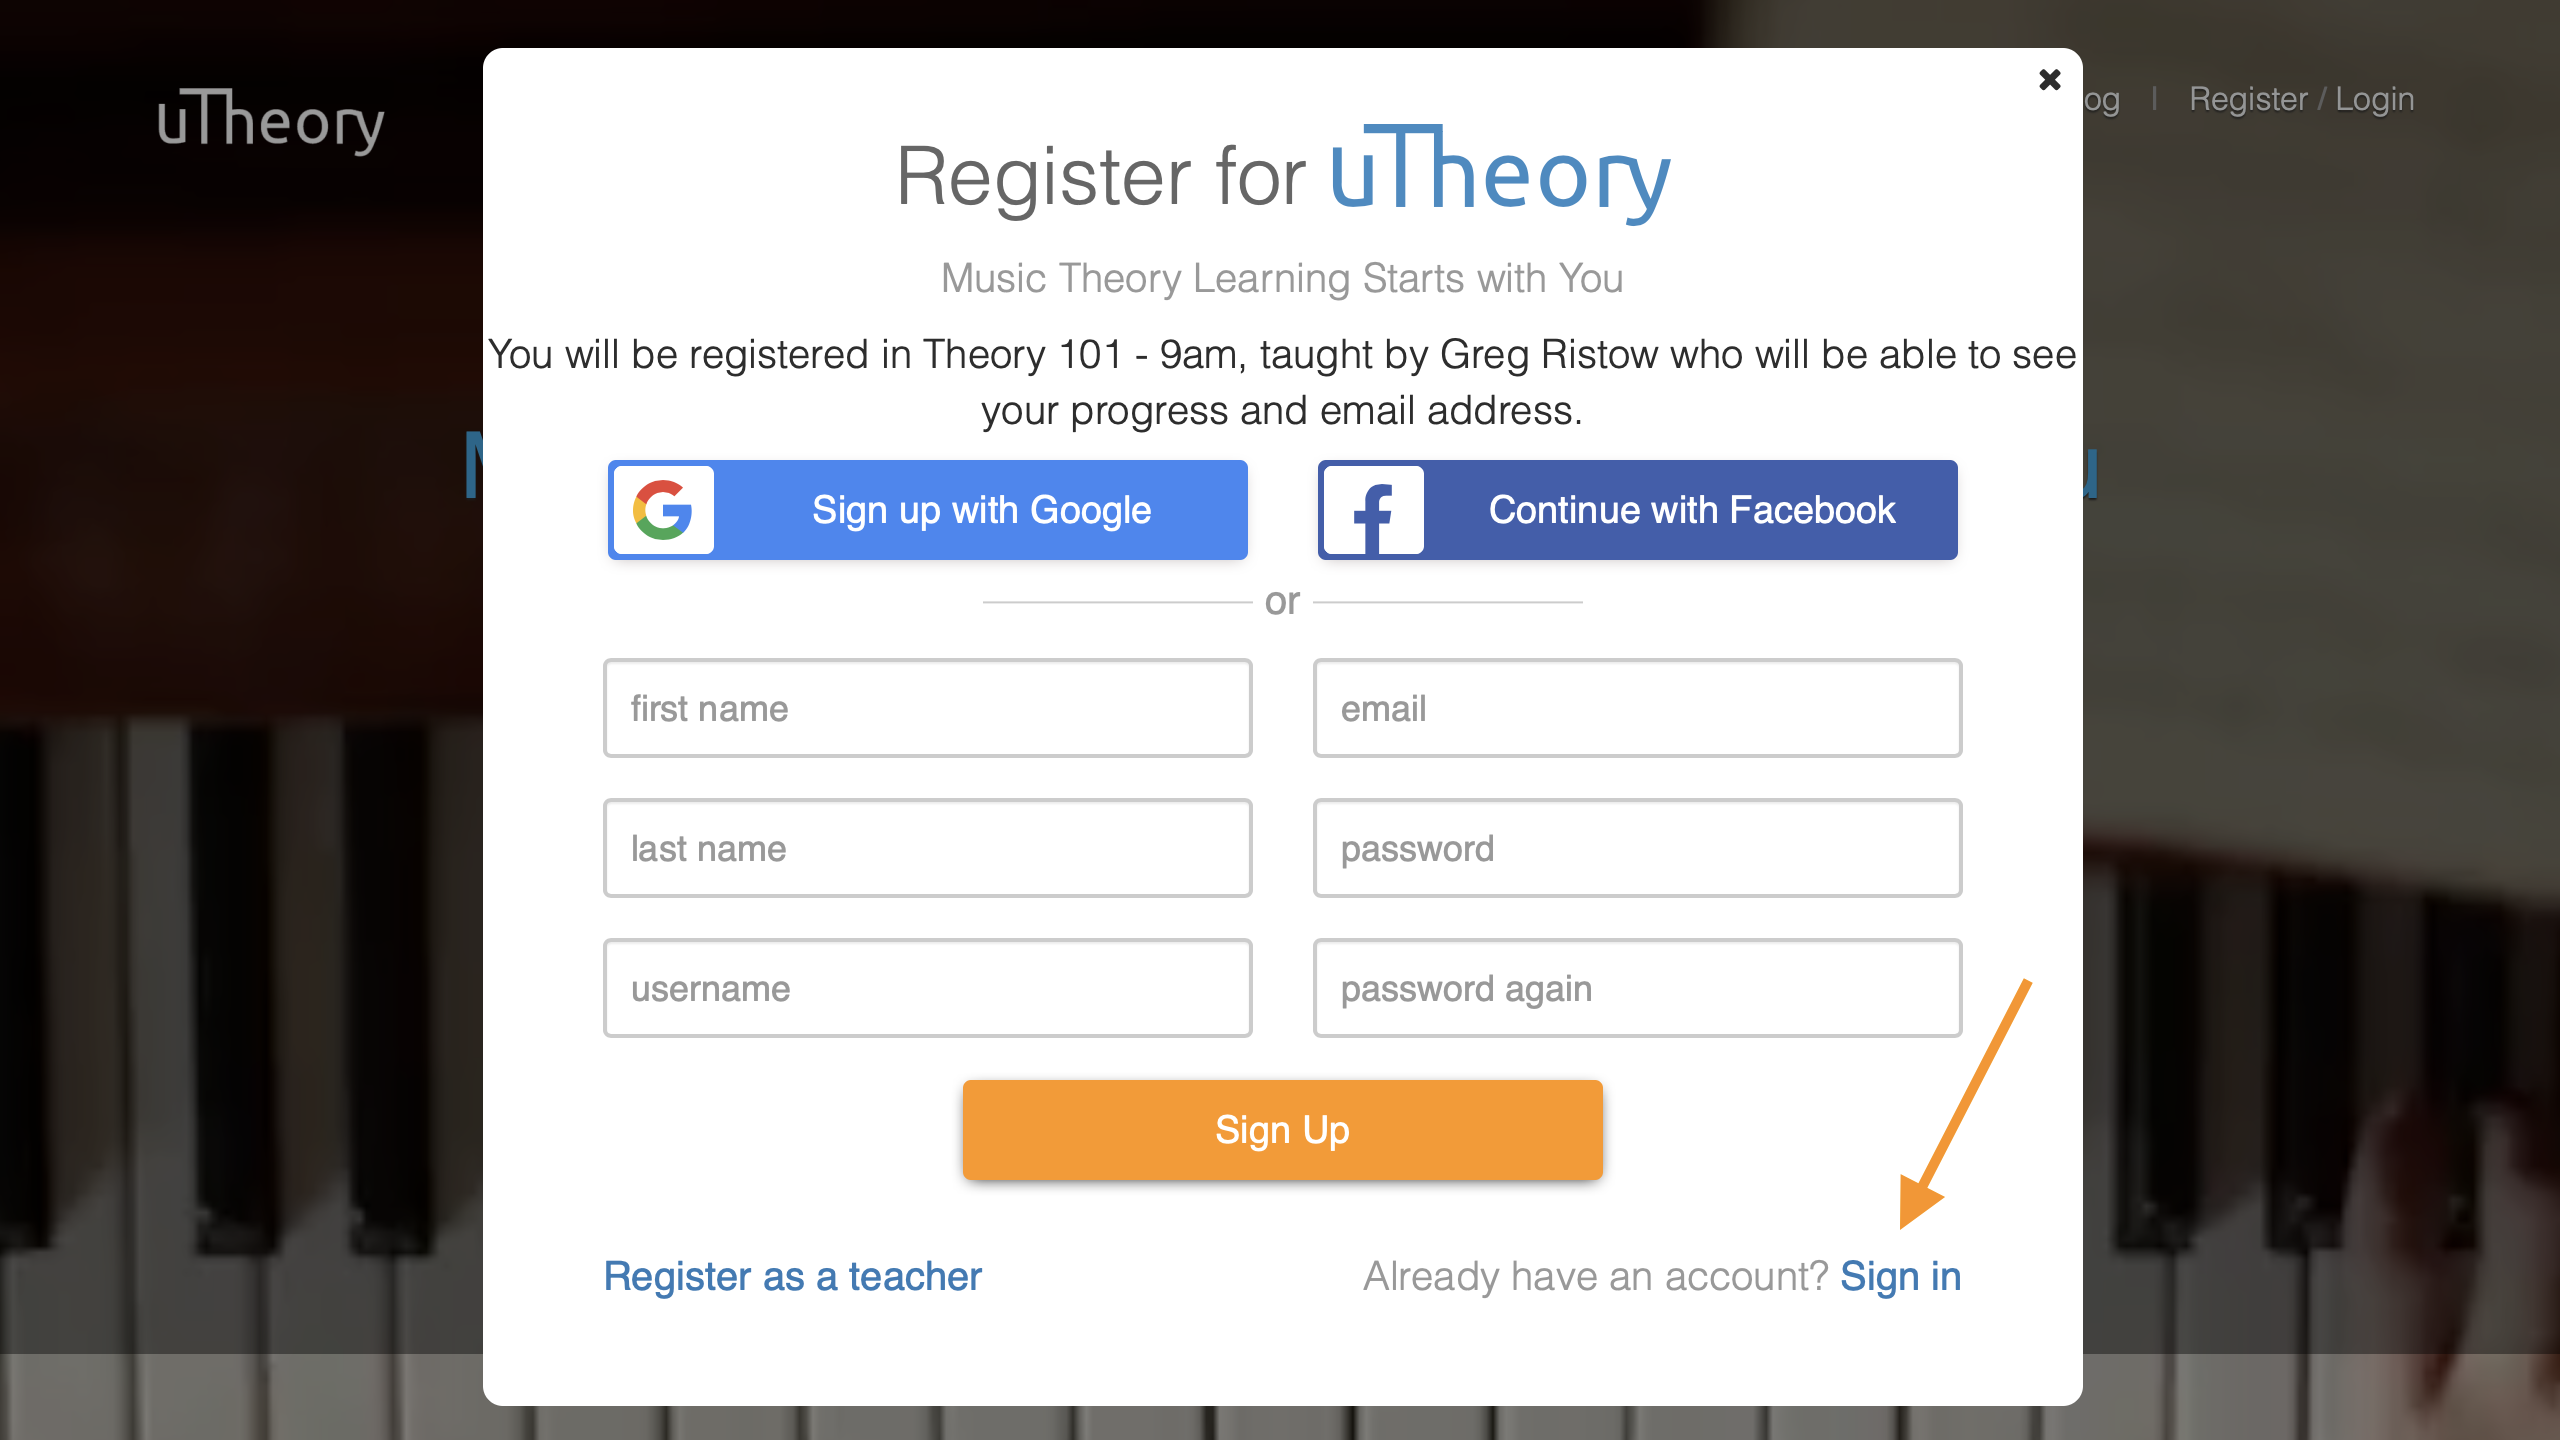 Register or sign in to uTheory screen